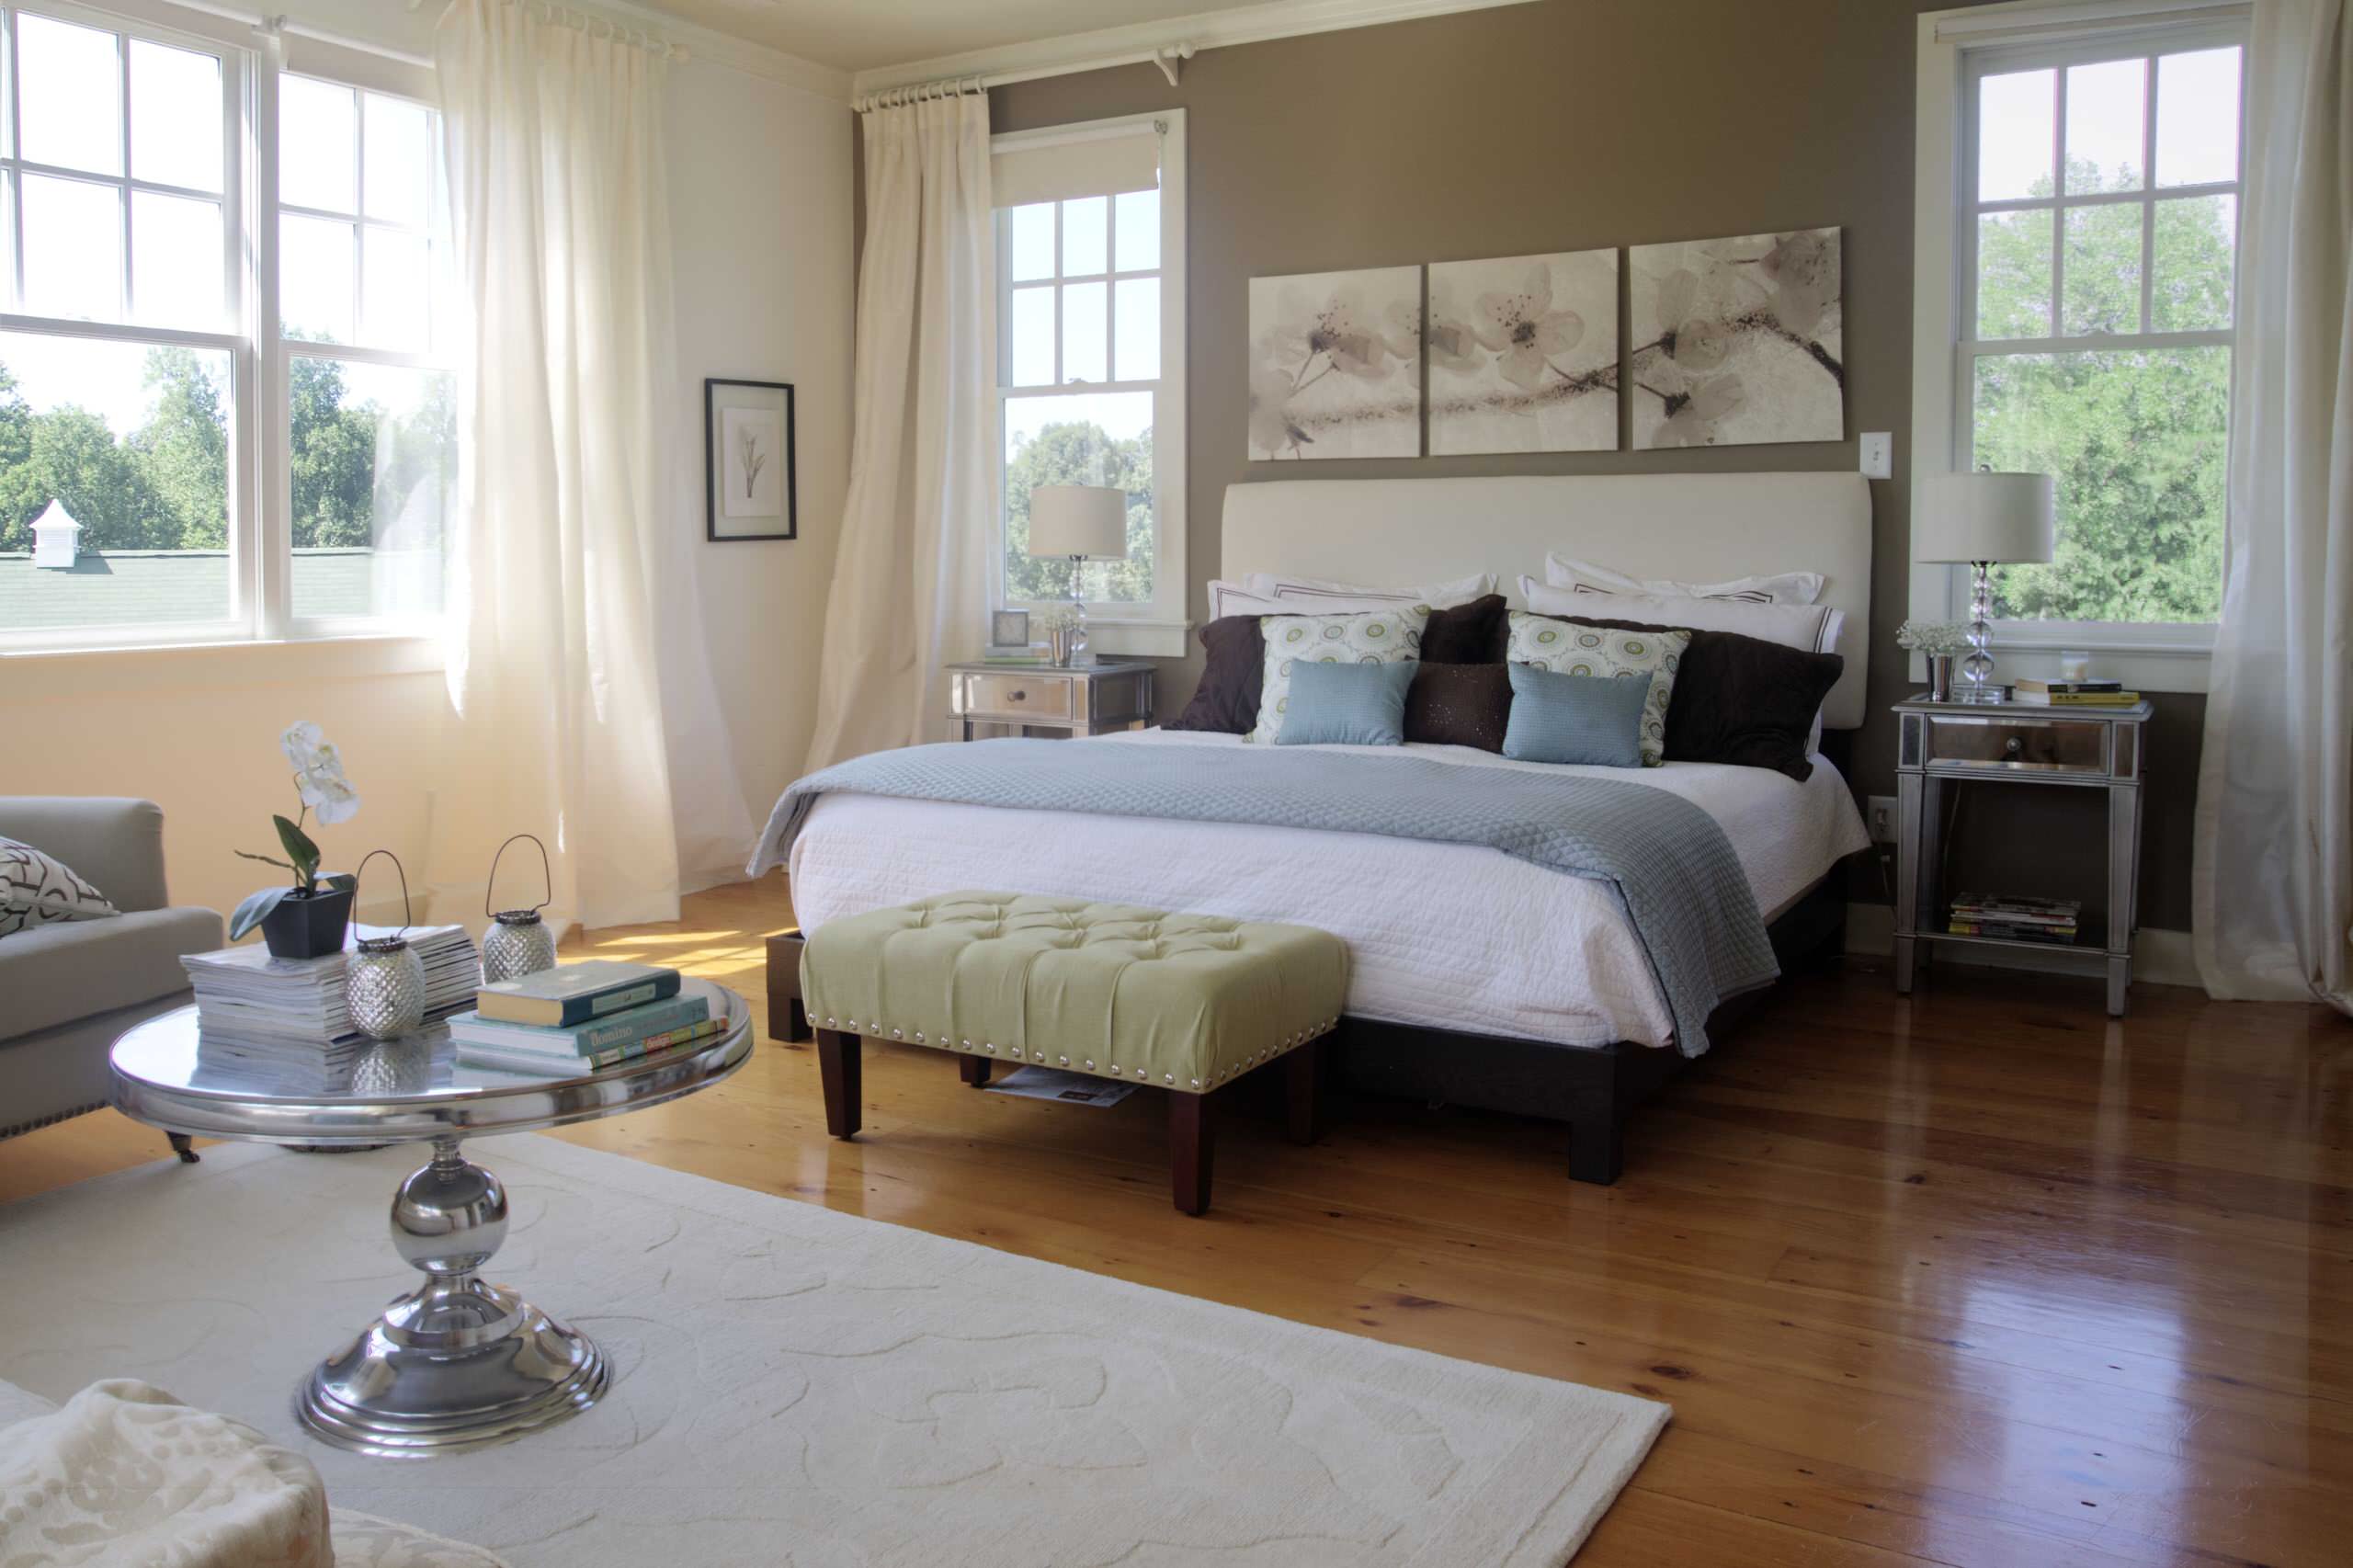 Modern feel and country vibes (from Houzz)